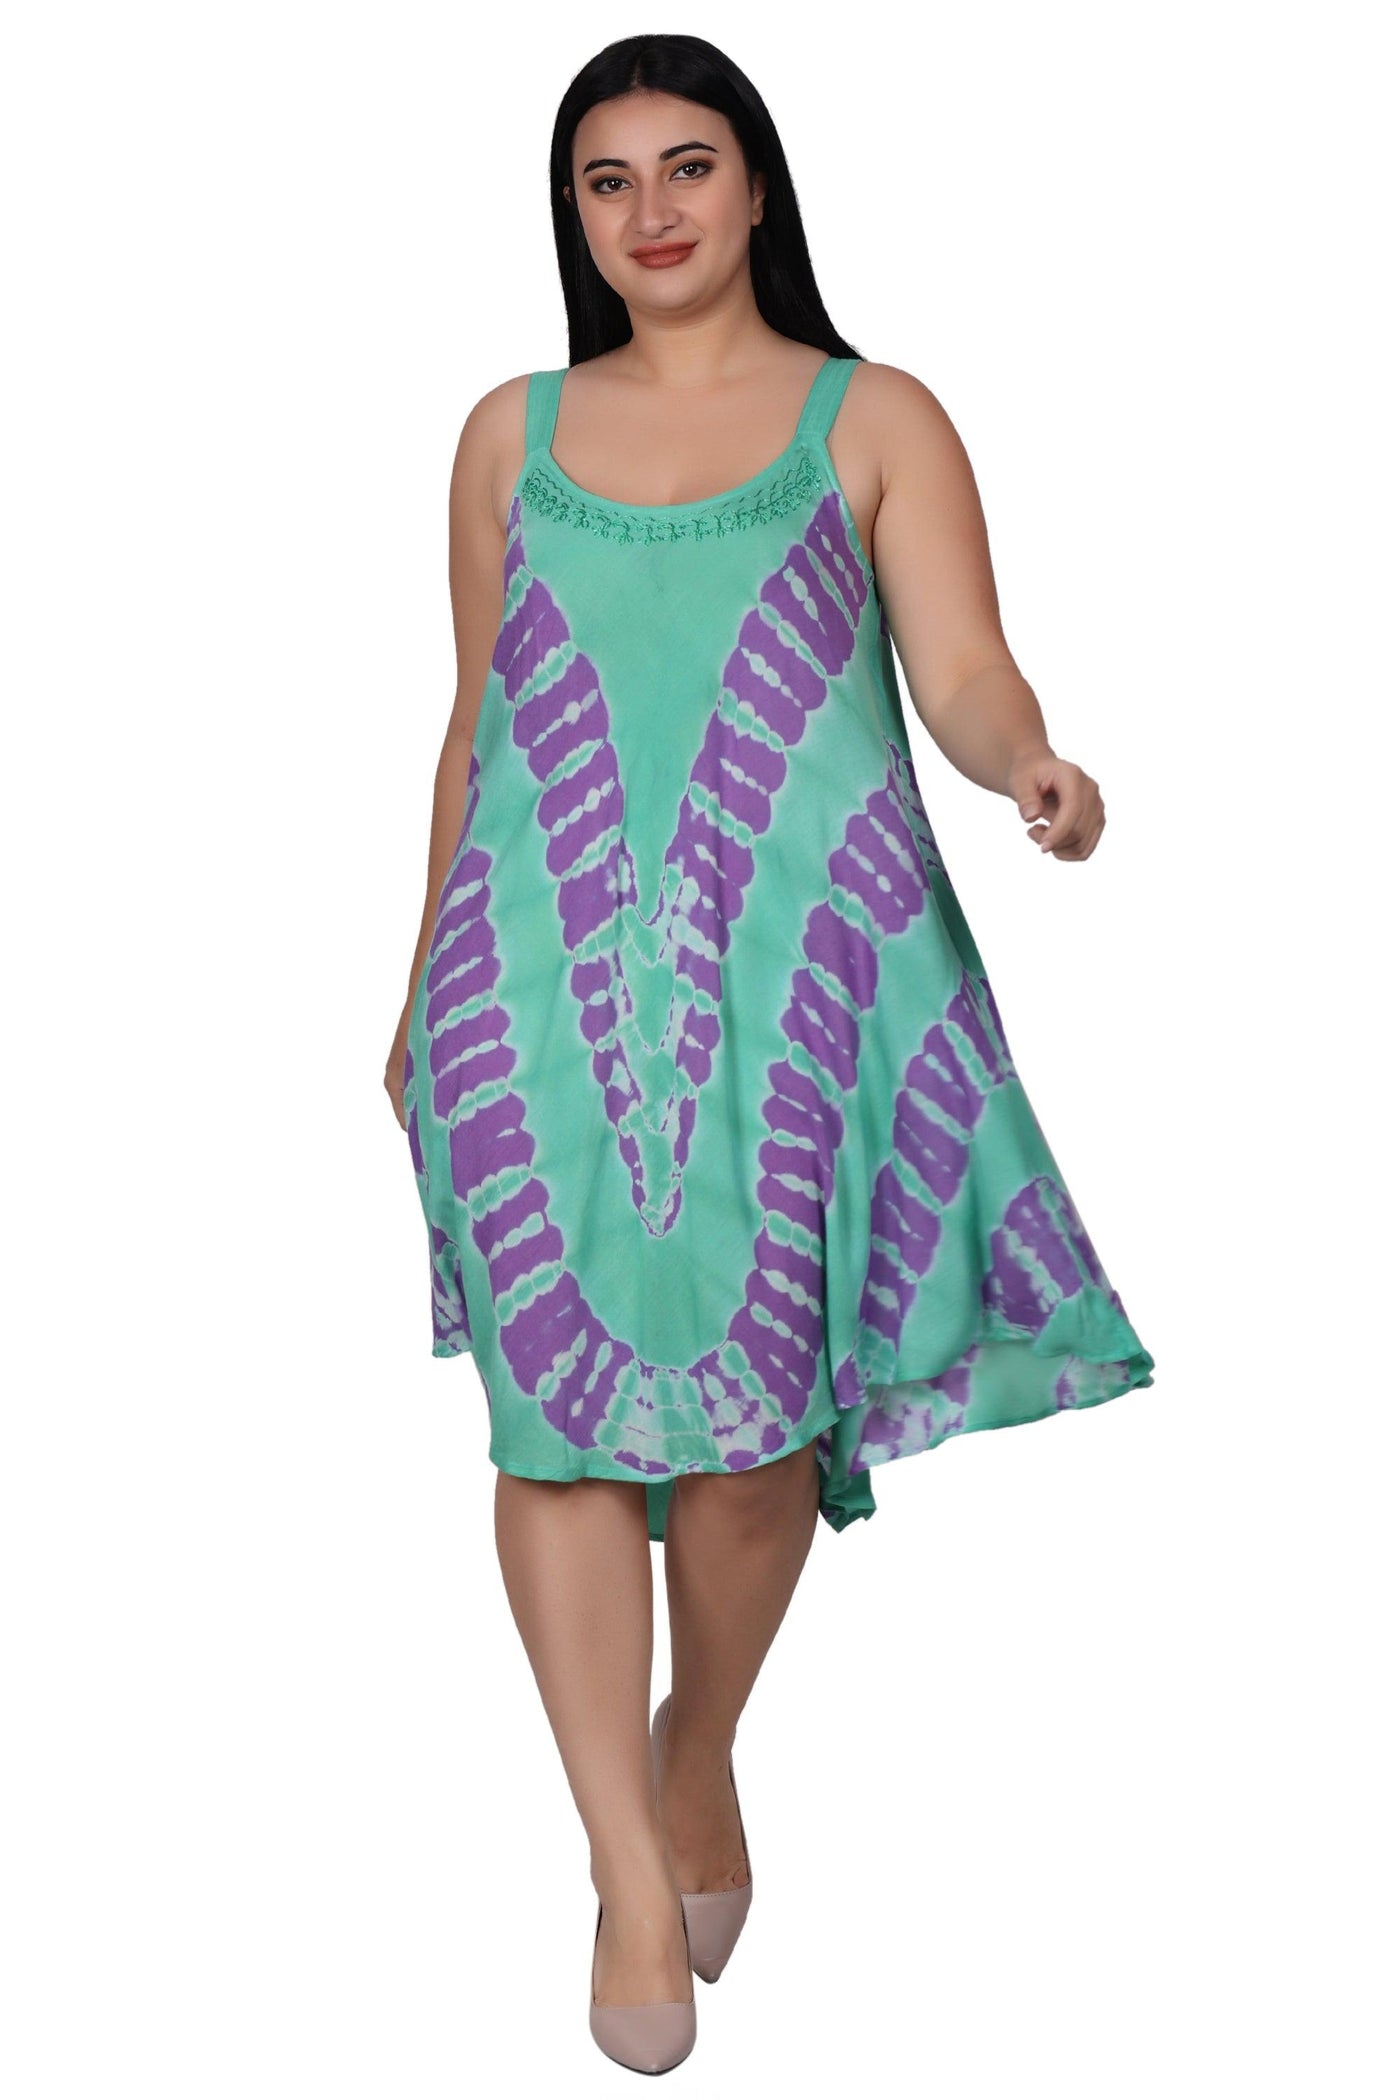 Embroidered Tie Dye Dress 362200STP